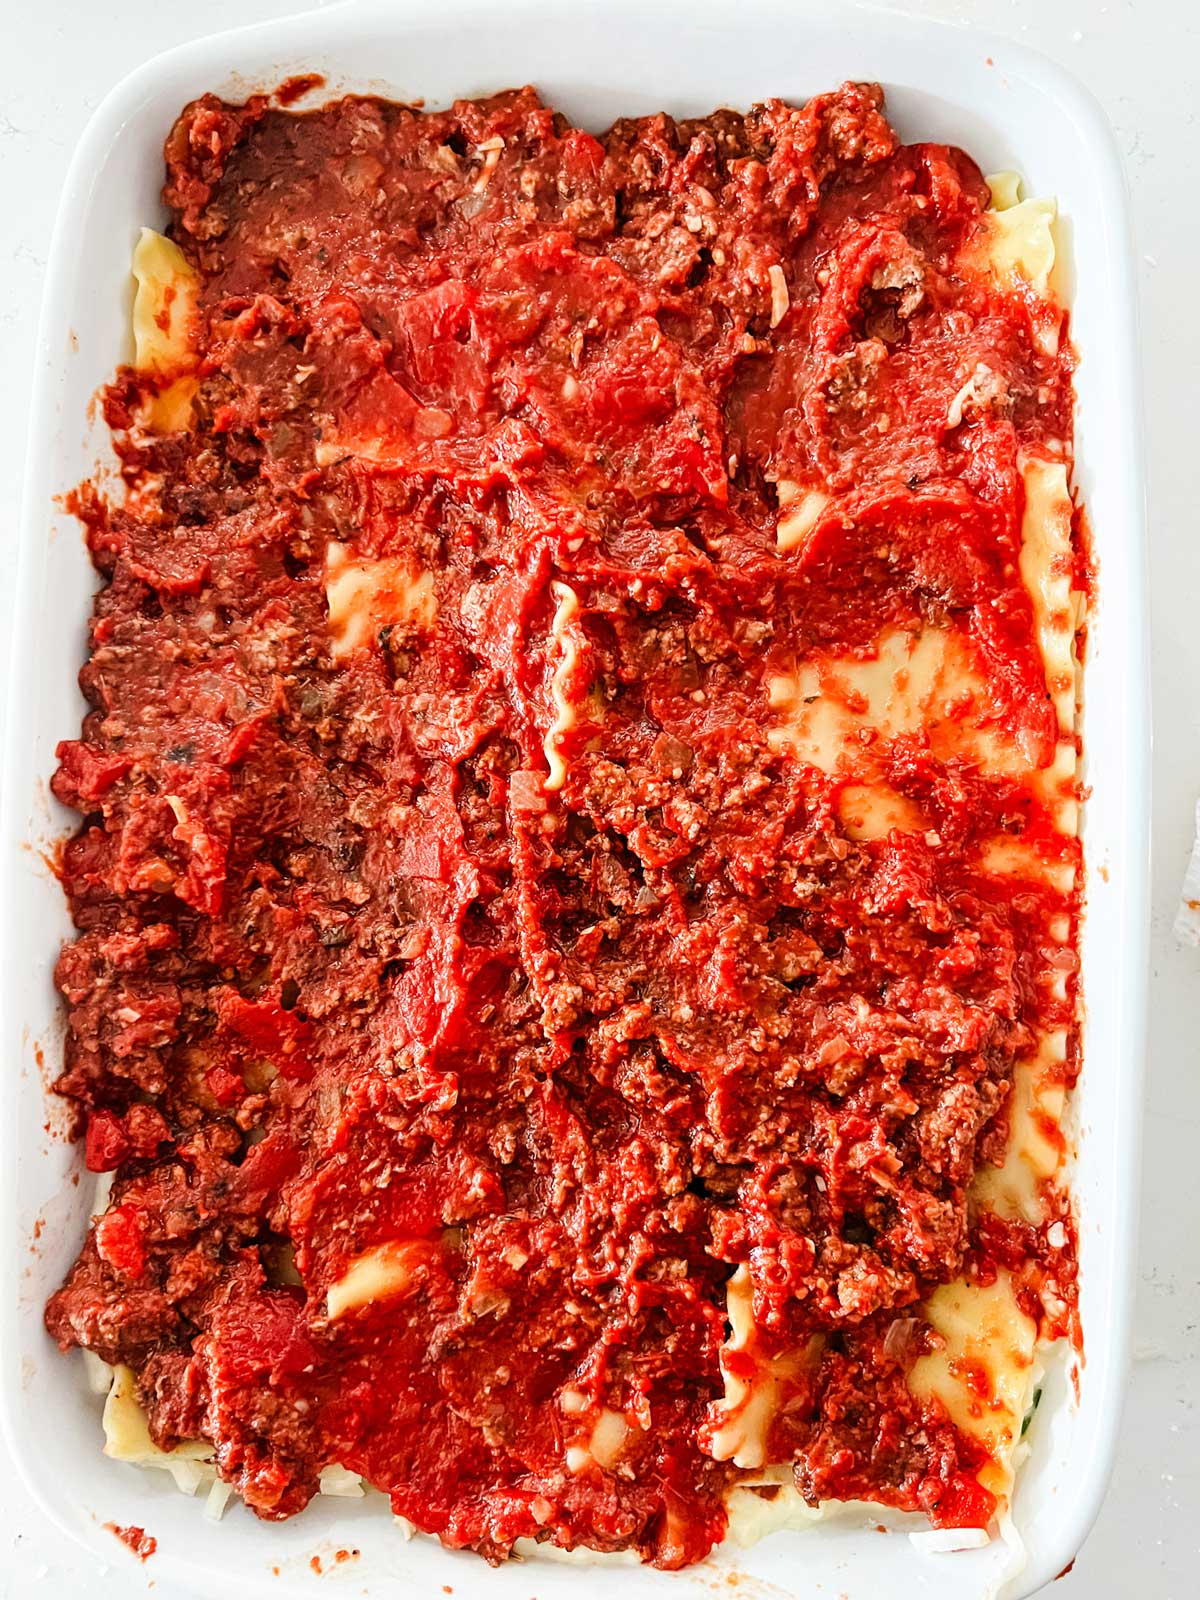 Meat sauce covering a lasagna.